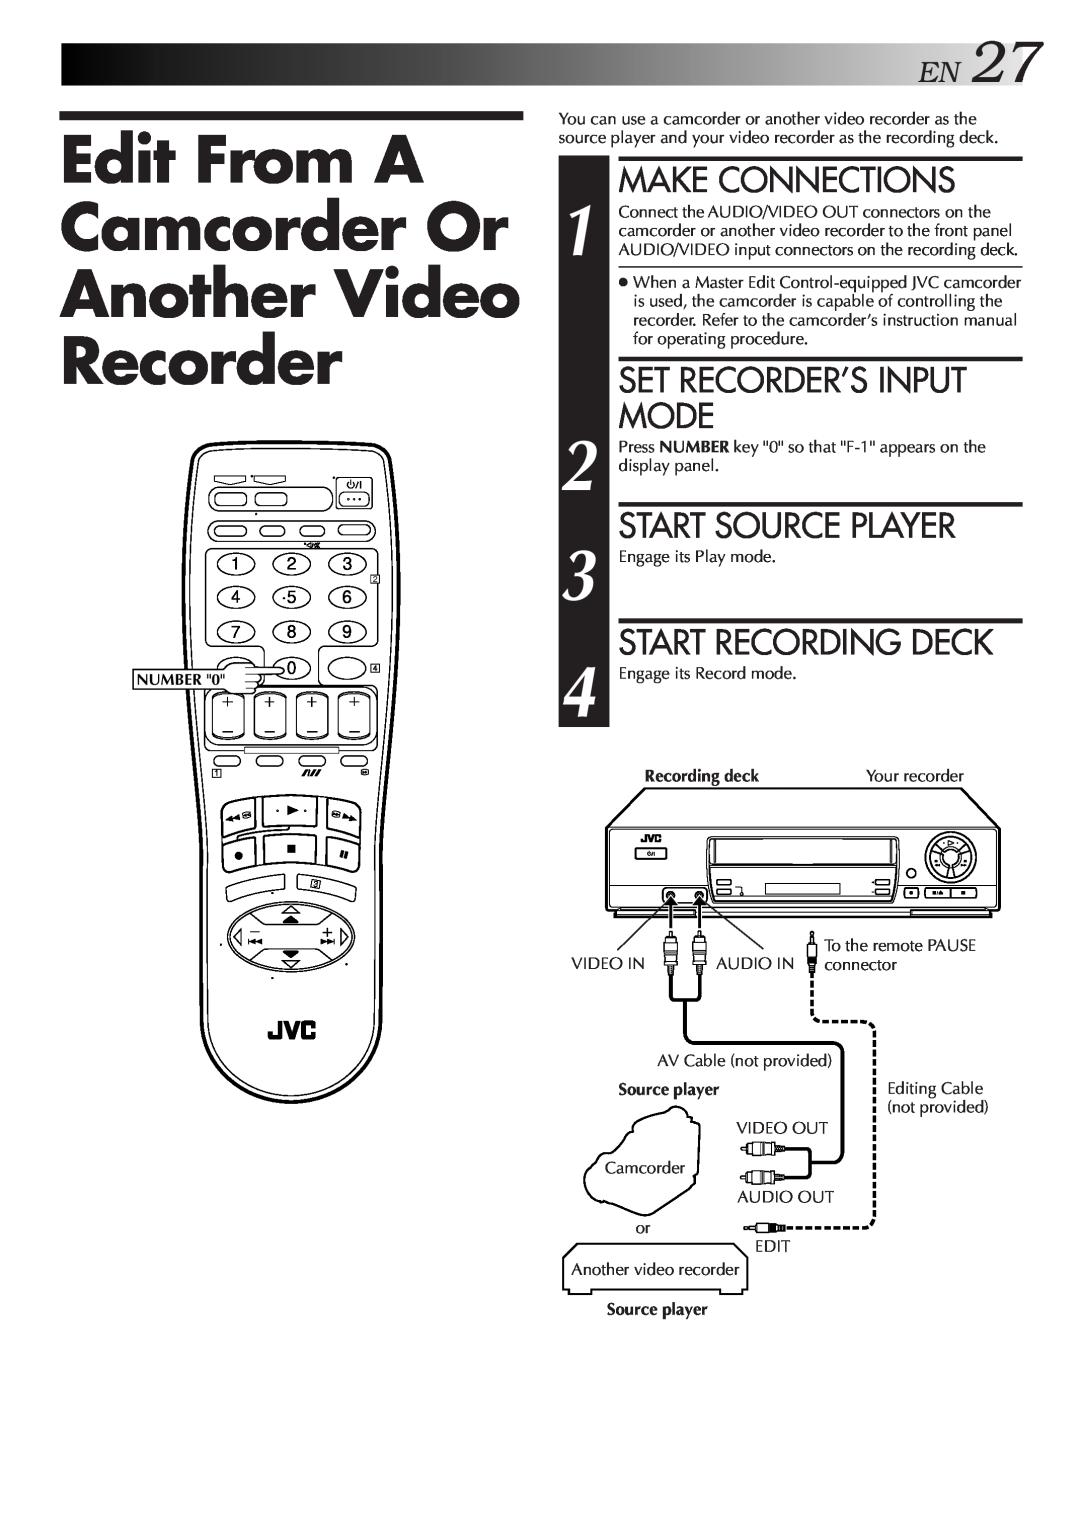 JVC HR-J455EA Edit From A Camcorder Or Another Video Recorder, 1 2 4 5 7 8, Recording deck, Source player, Number 